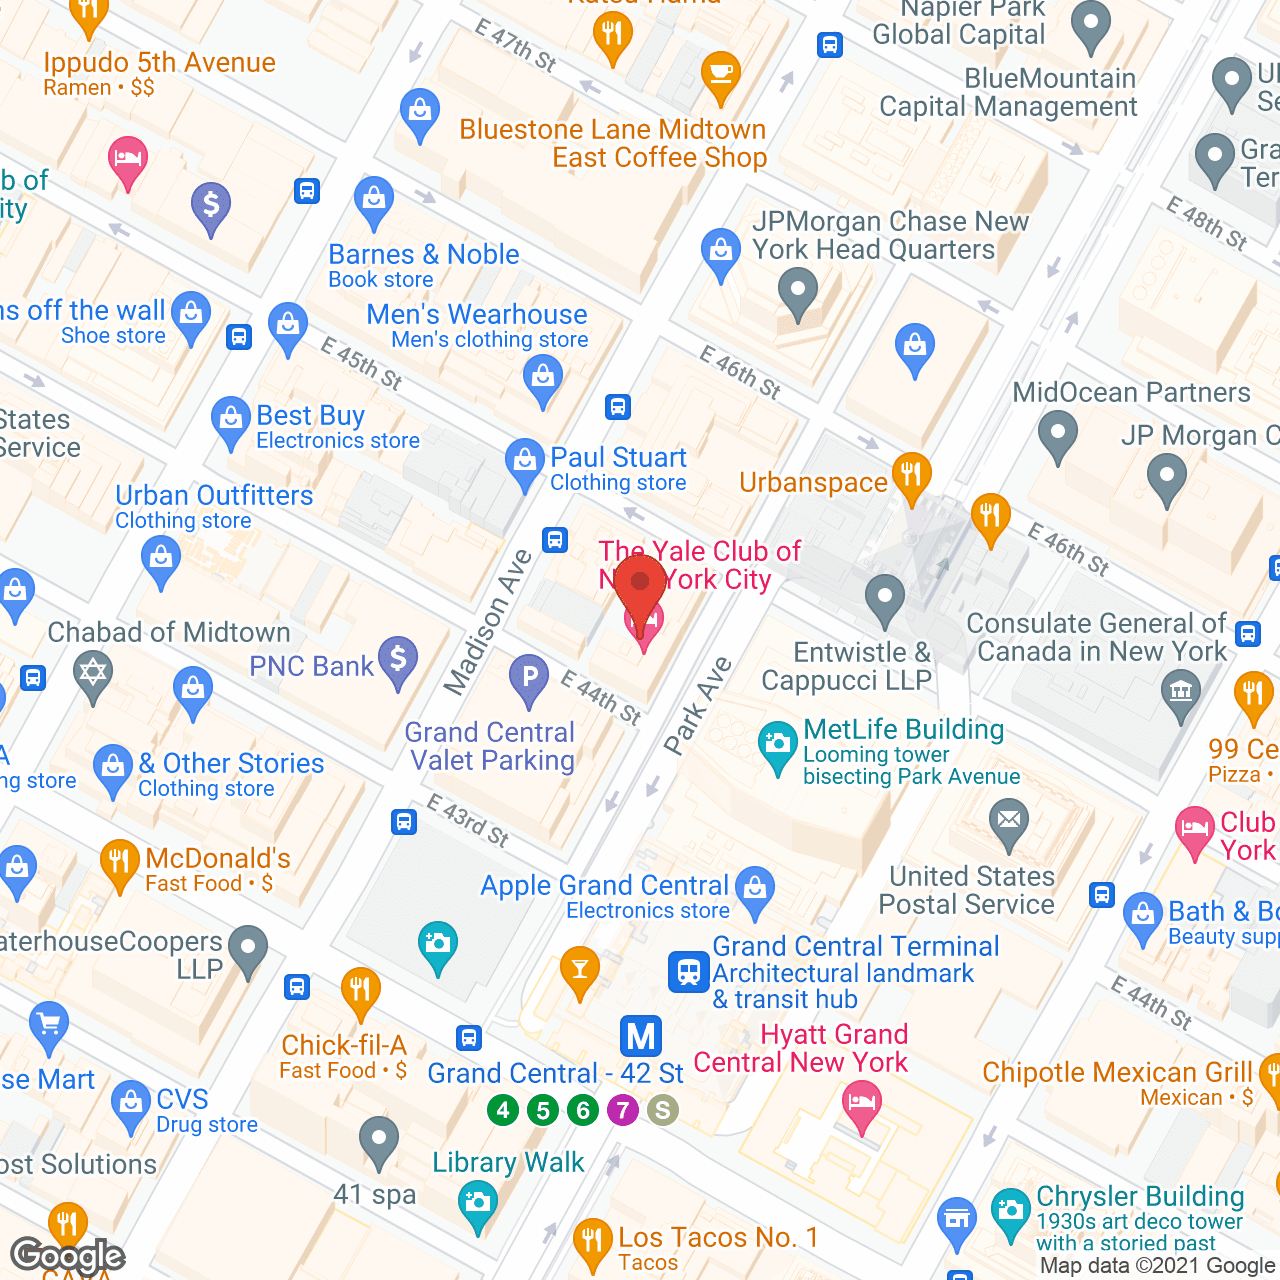 A Caring Hand Services - New York in google map